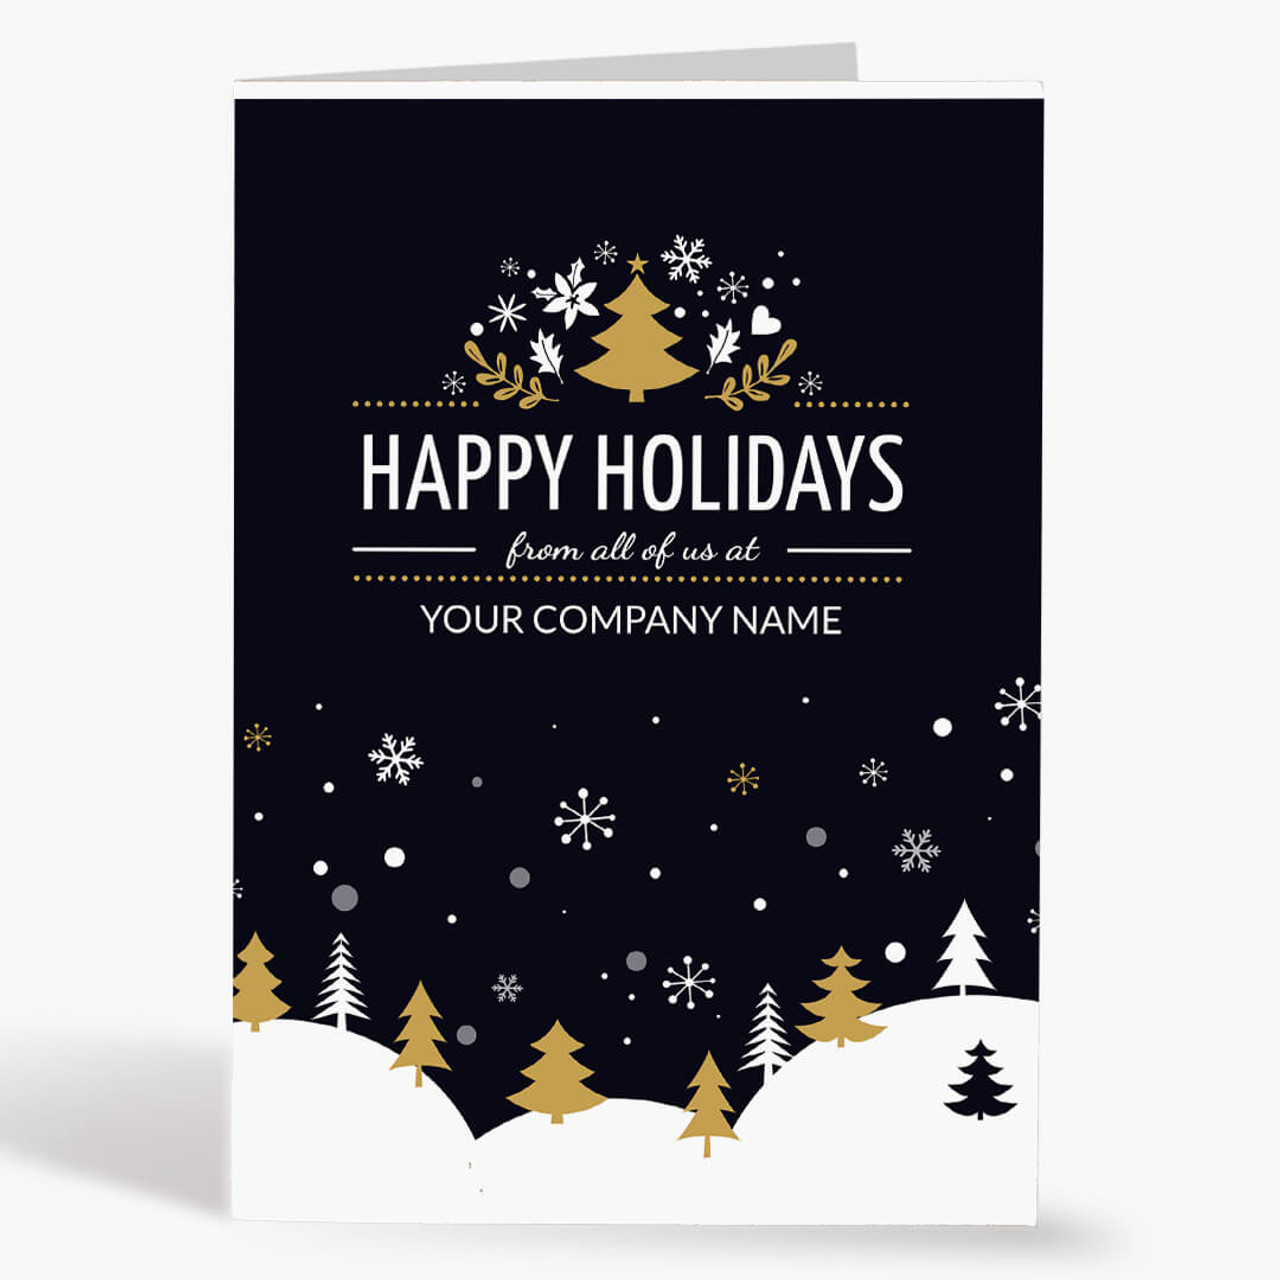 A Winter Greeting Christmas Card